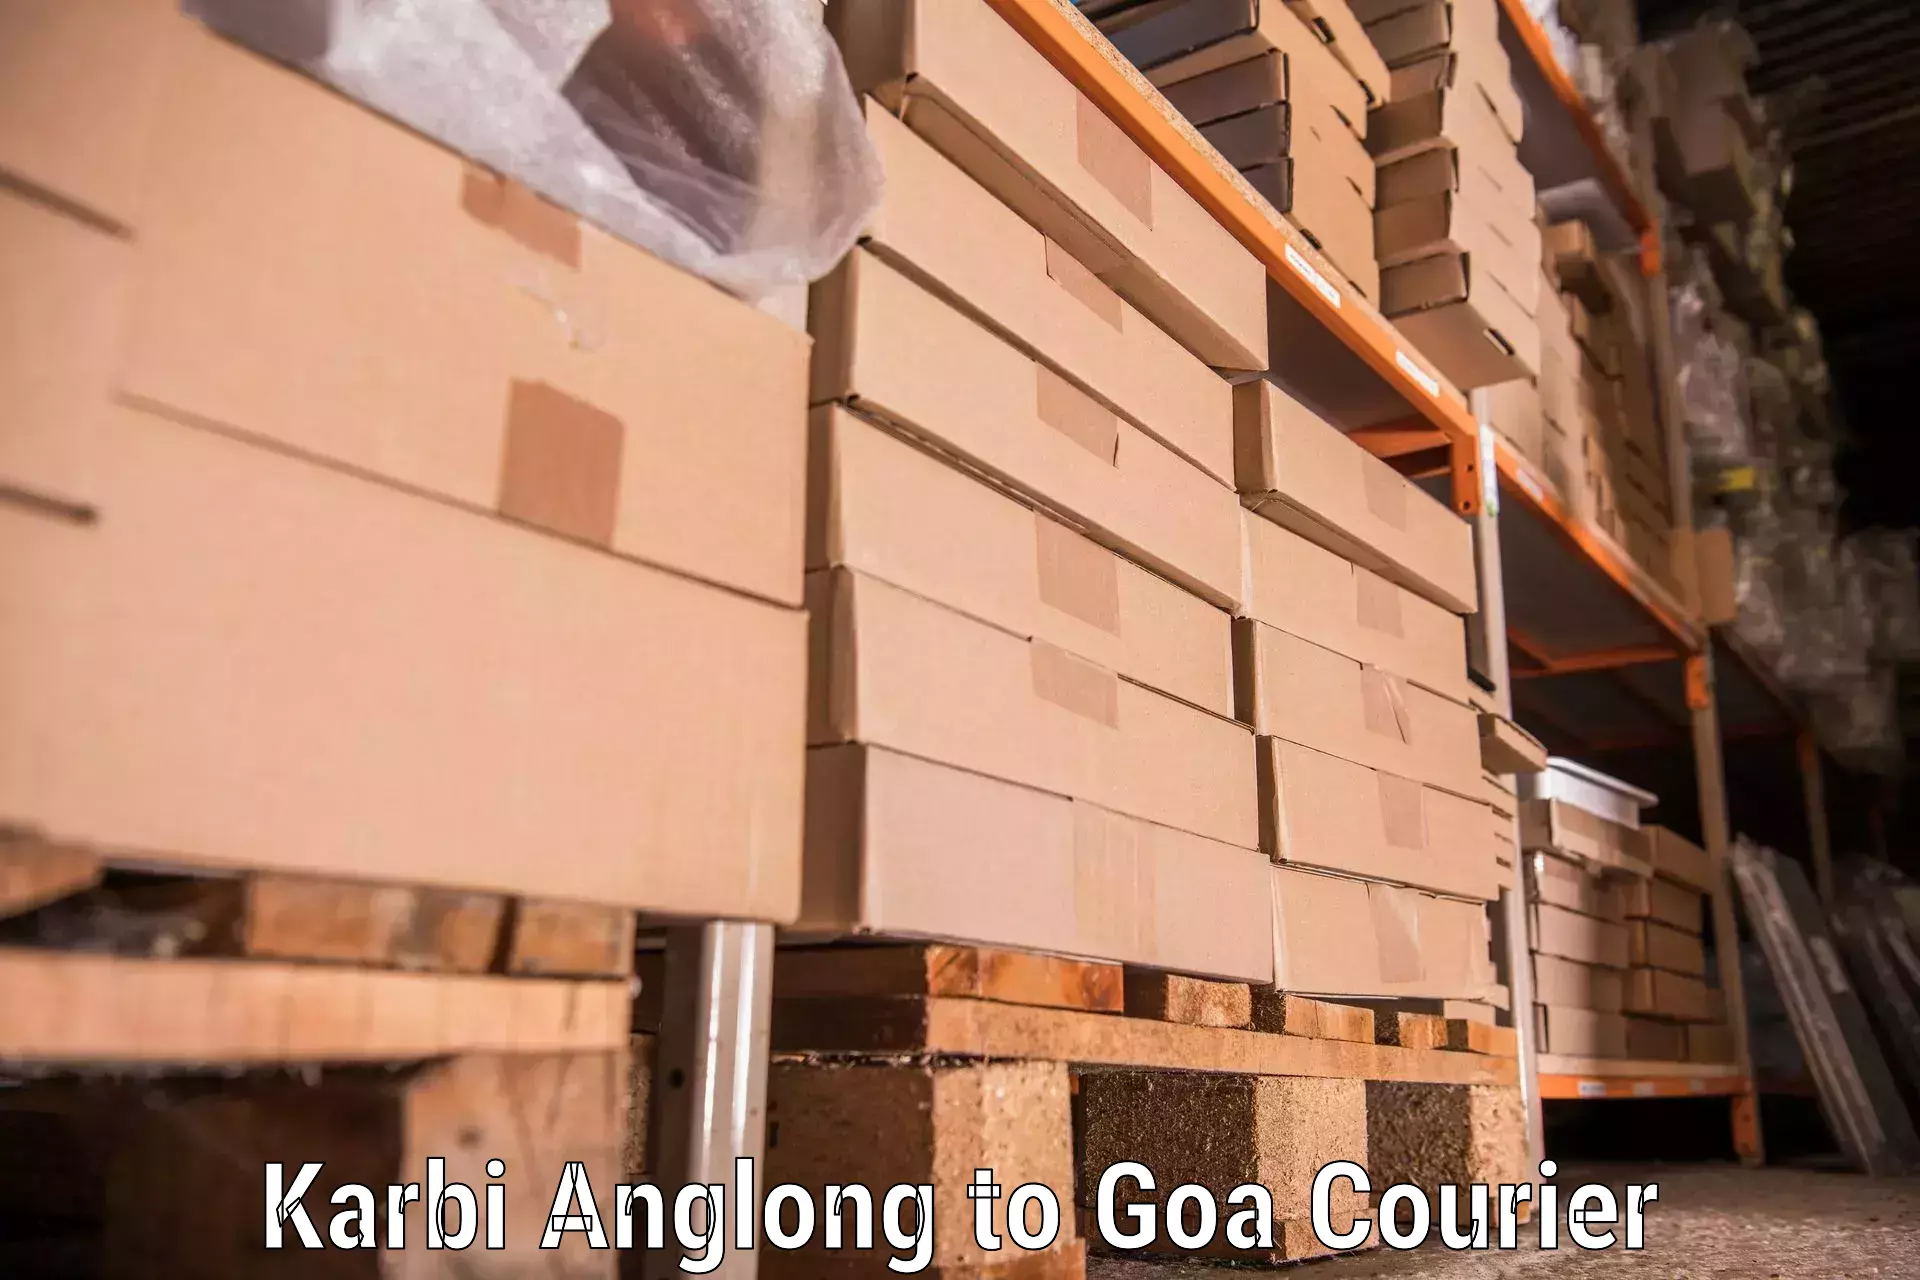 Quality relocation assistance in Karbi Anglong to South Goa